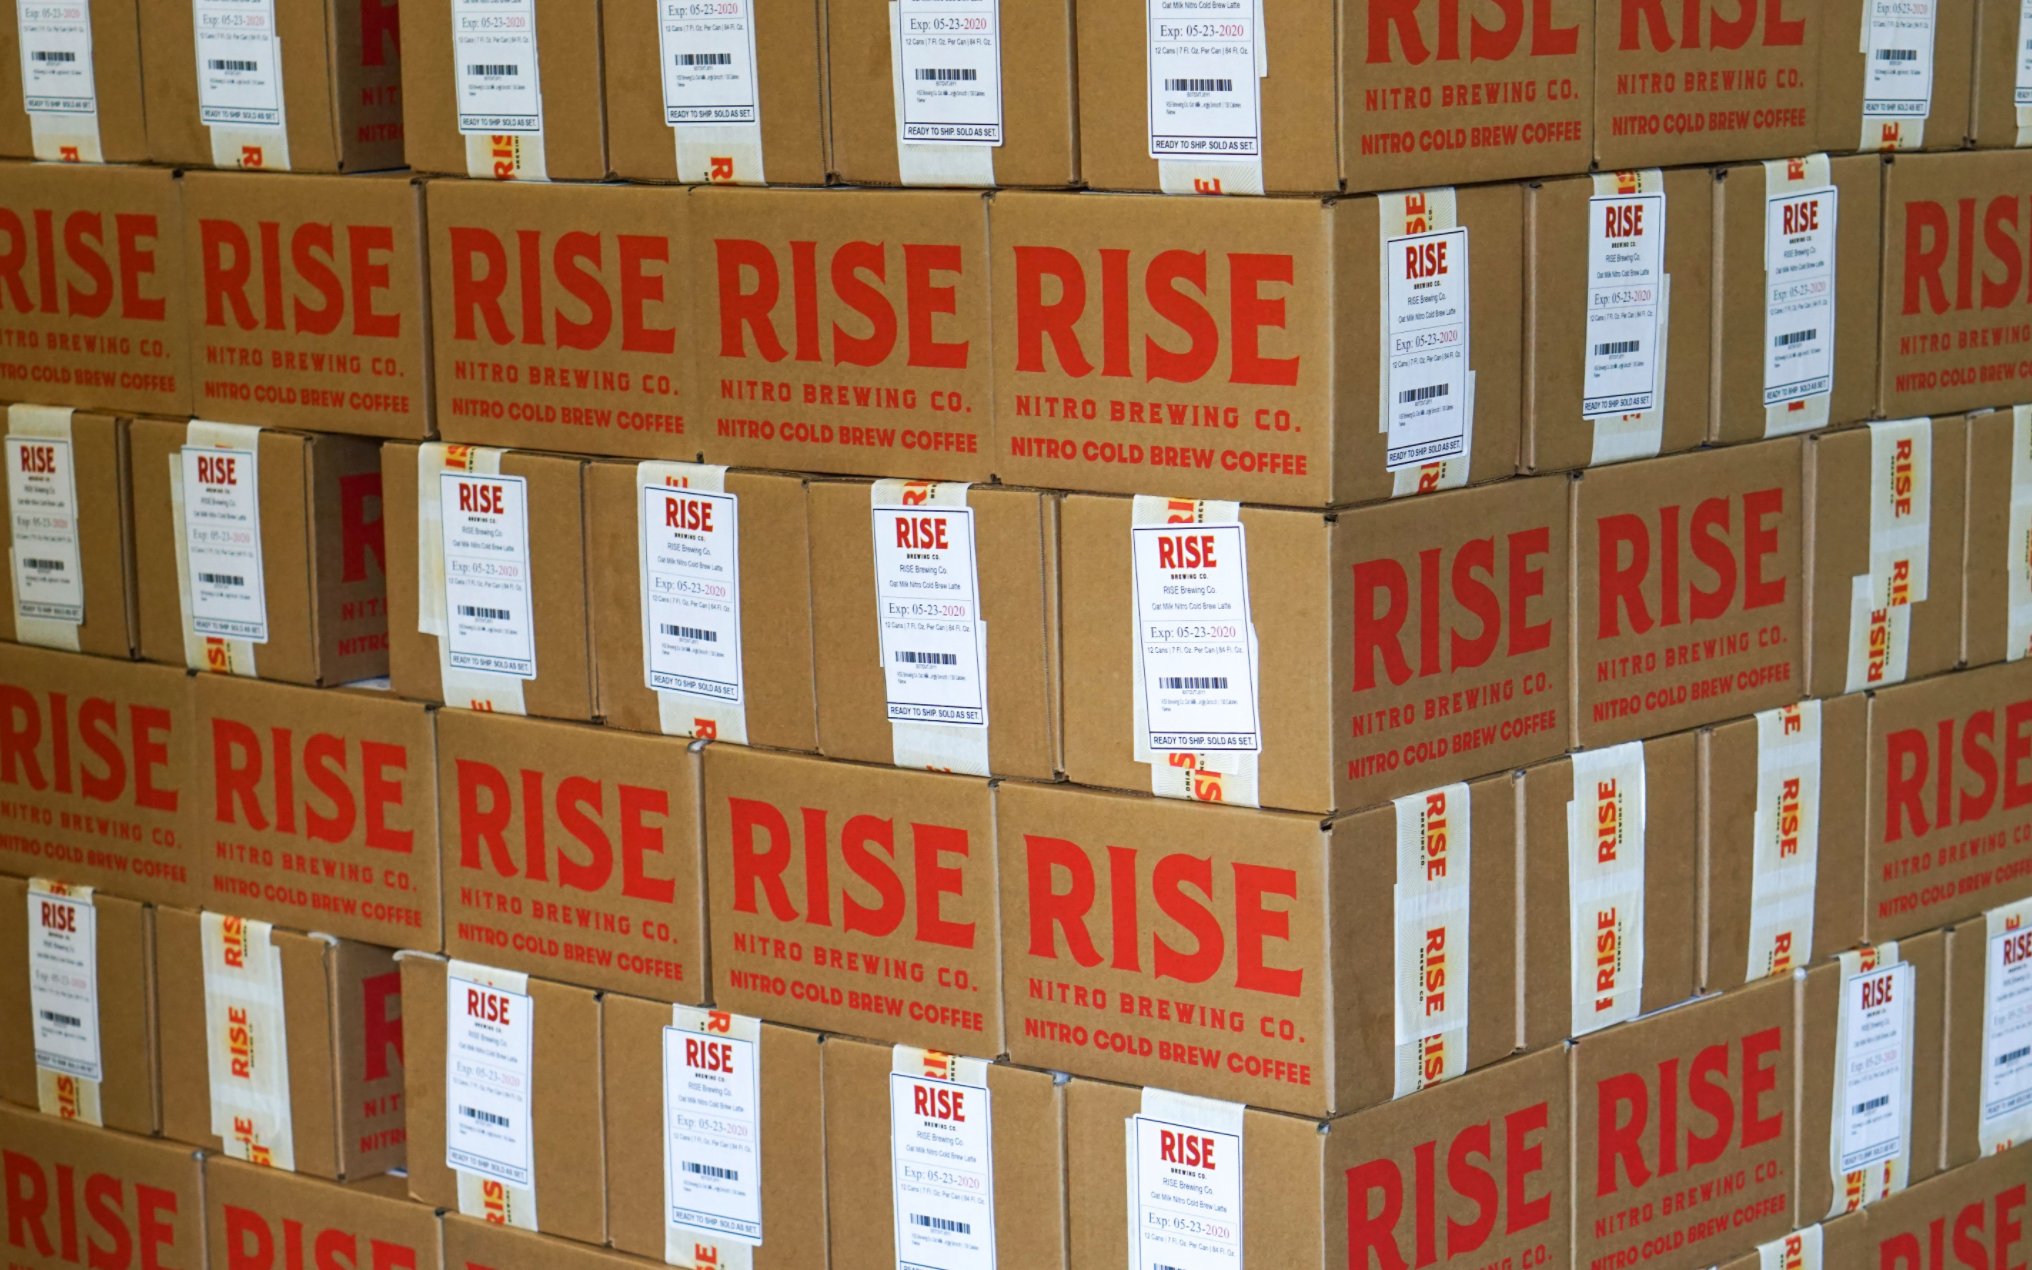 RISE Brewing Co. Subscription and Delivery options with RISE